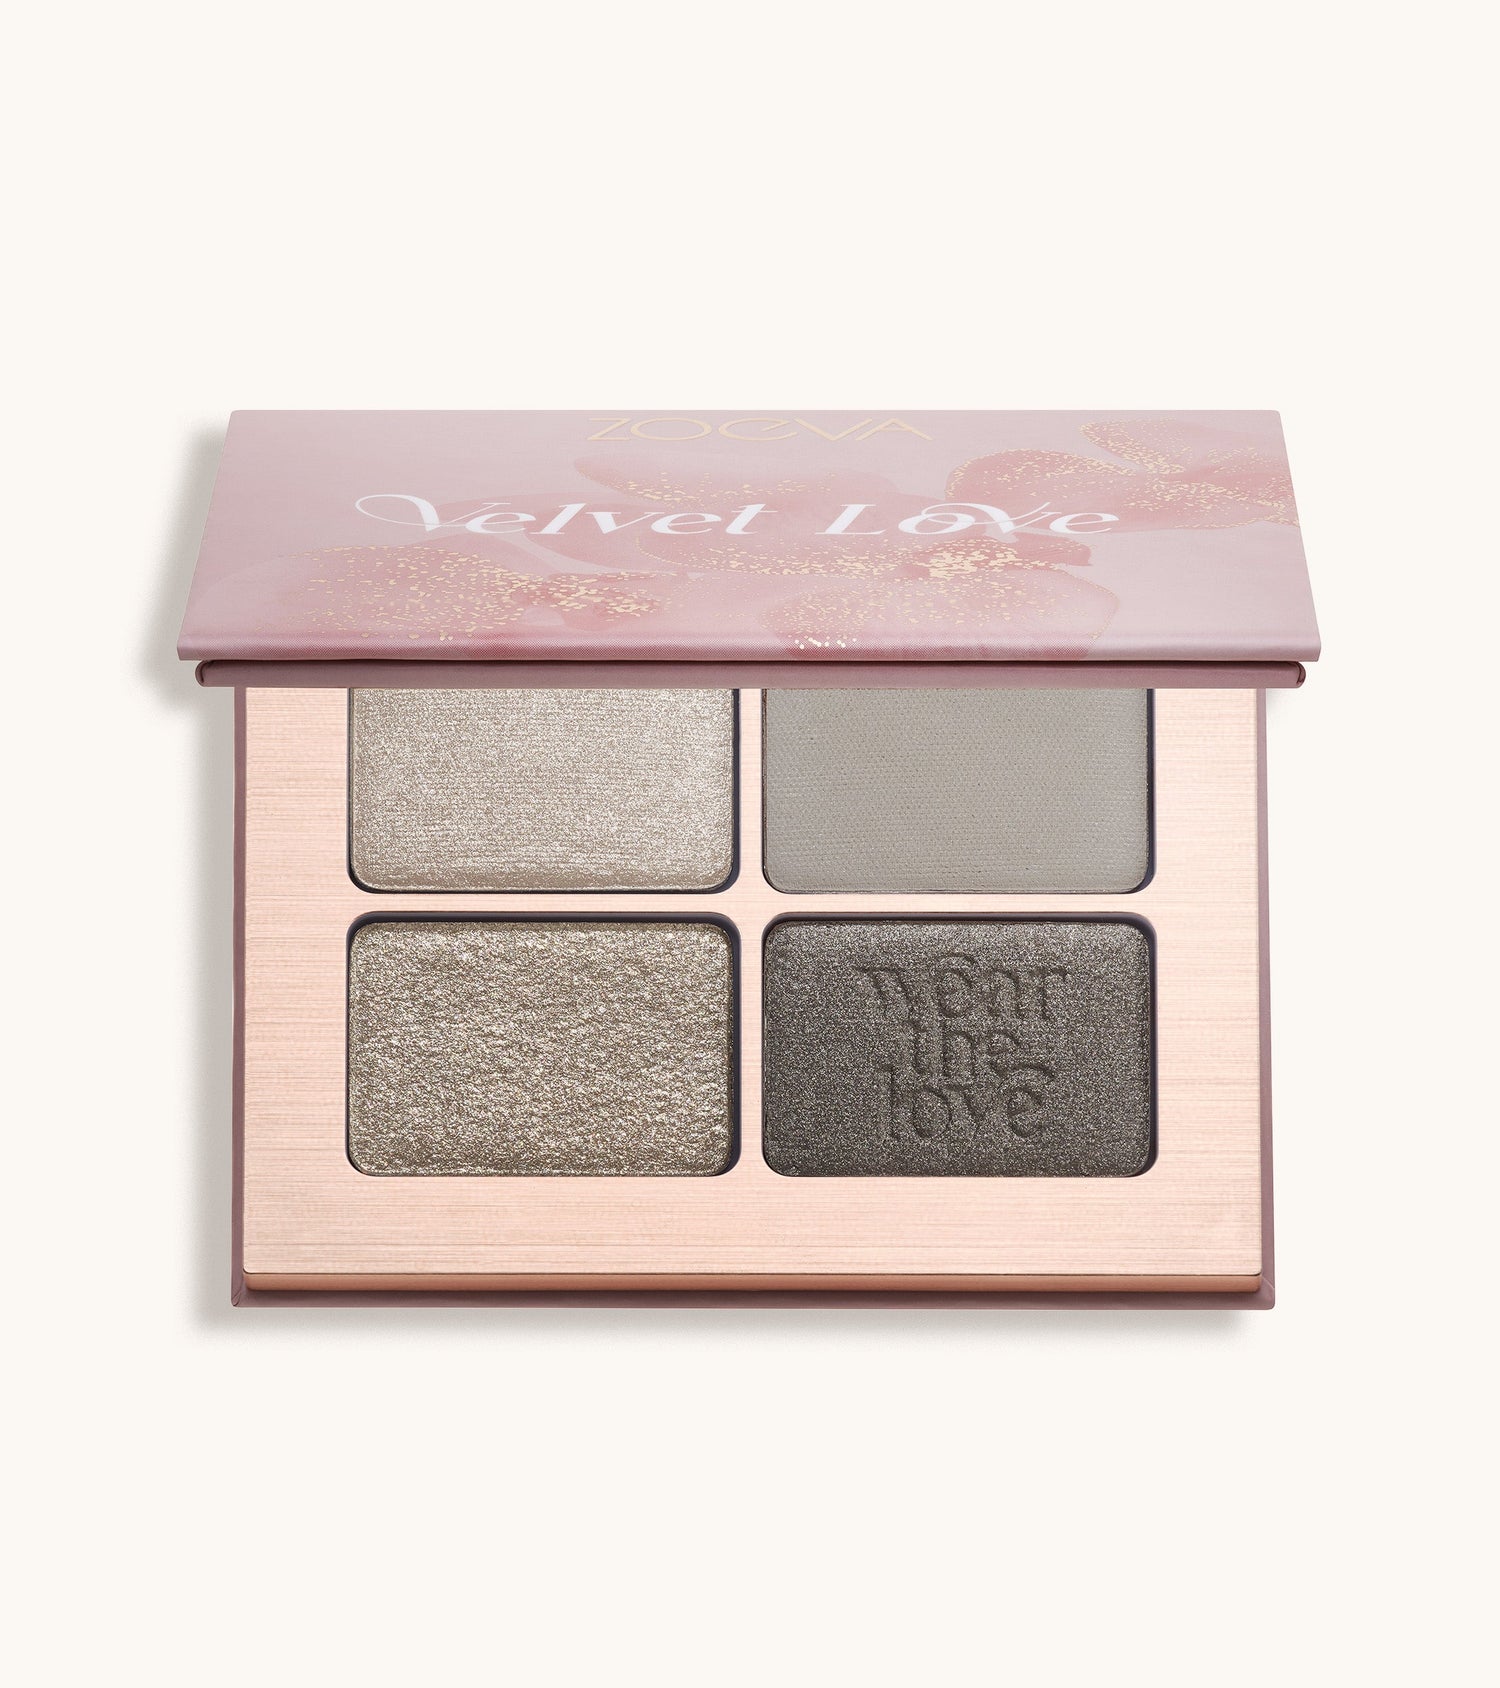 Velvet Love Eyeshadow Quad Palette (Smoky Sultry Eyes) Main Image featured